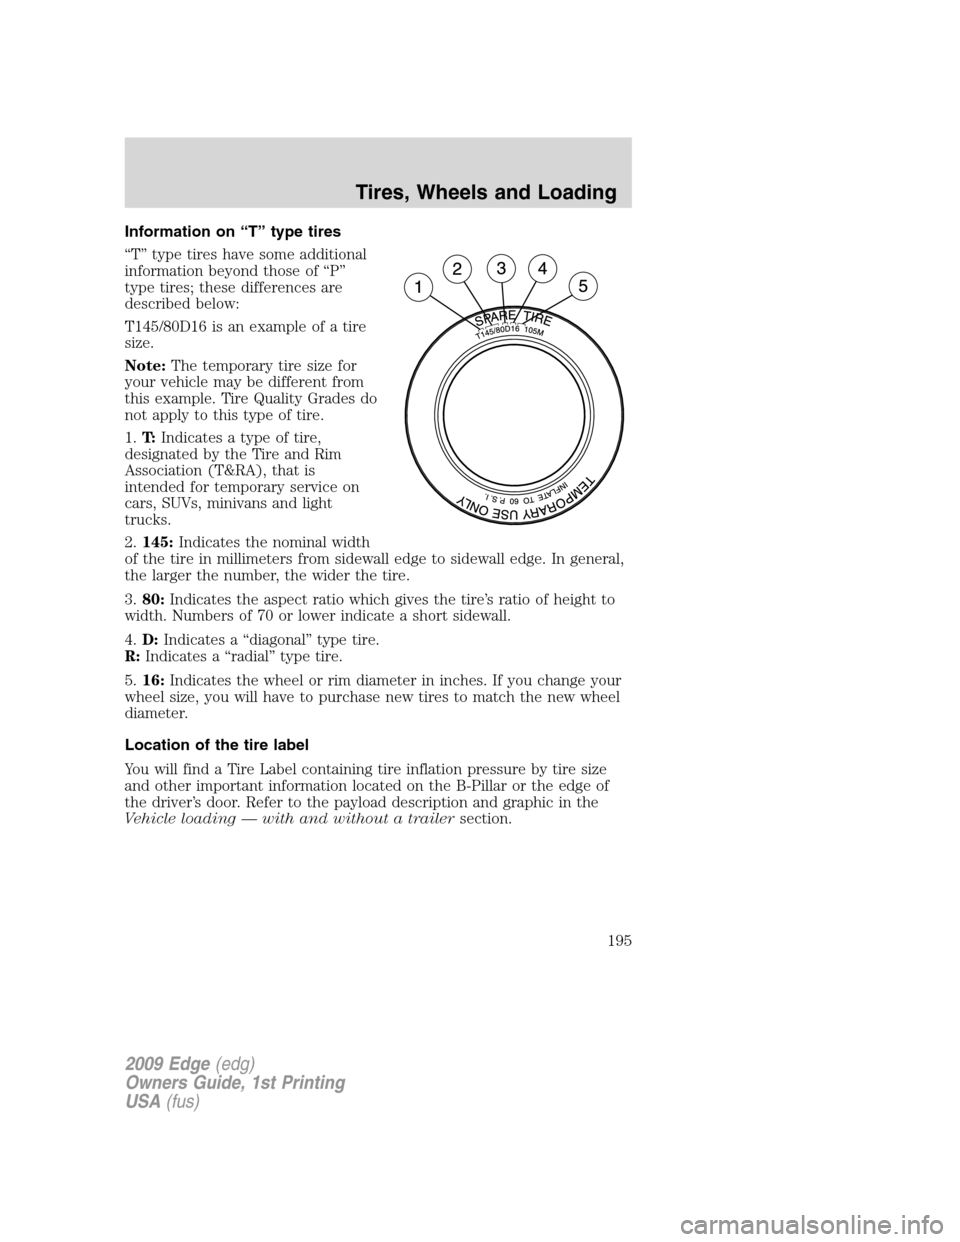 FORD EDGE 2009 1.G Owners Manual Information on “T” type tires
“T” type tires have some additional
information beyond those of “P”
type tires; these differences are
described below:
T145/80D16 is an example of a tire
size